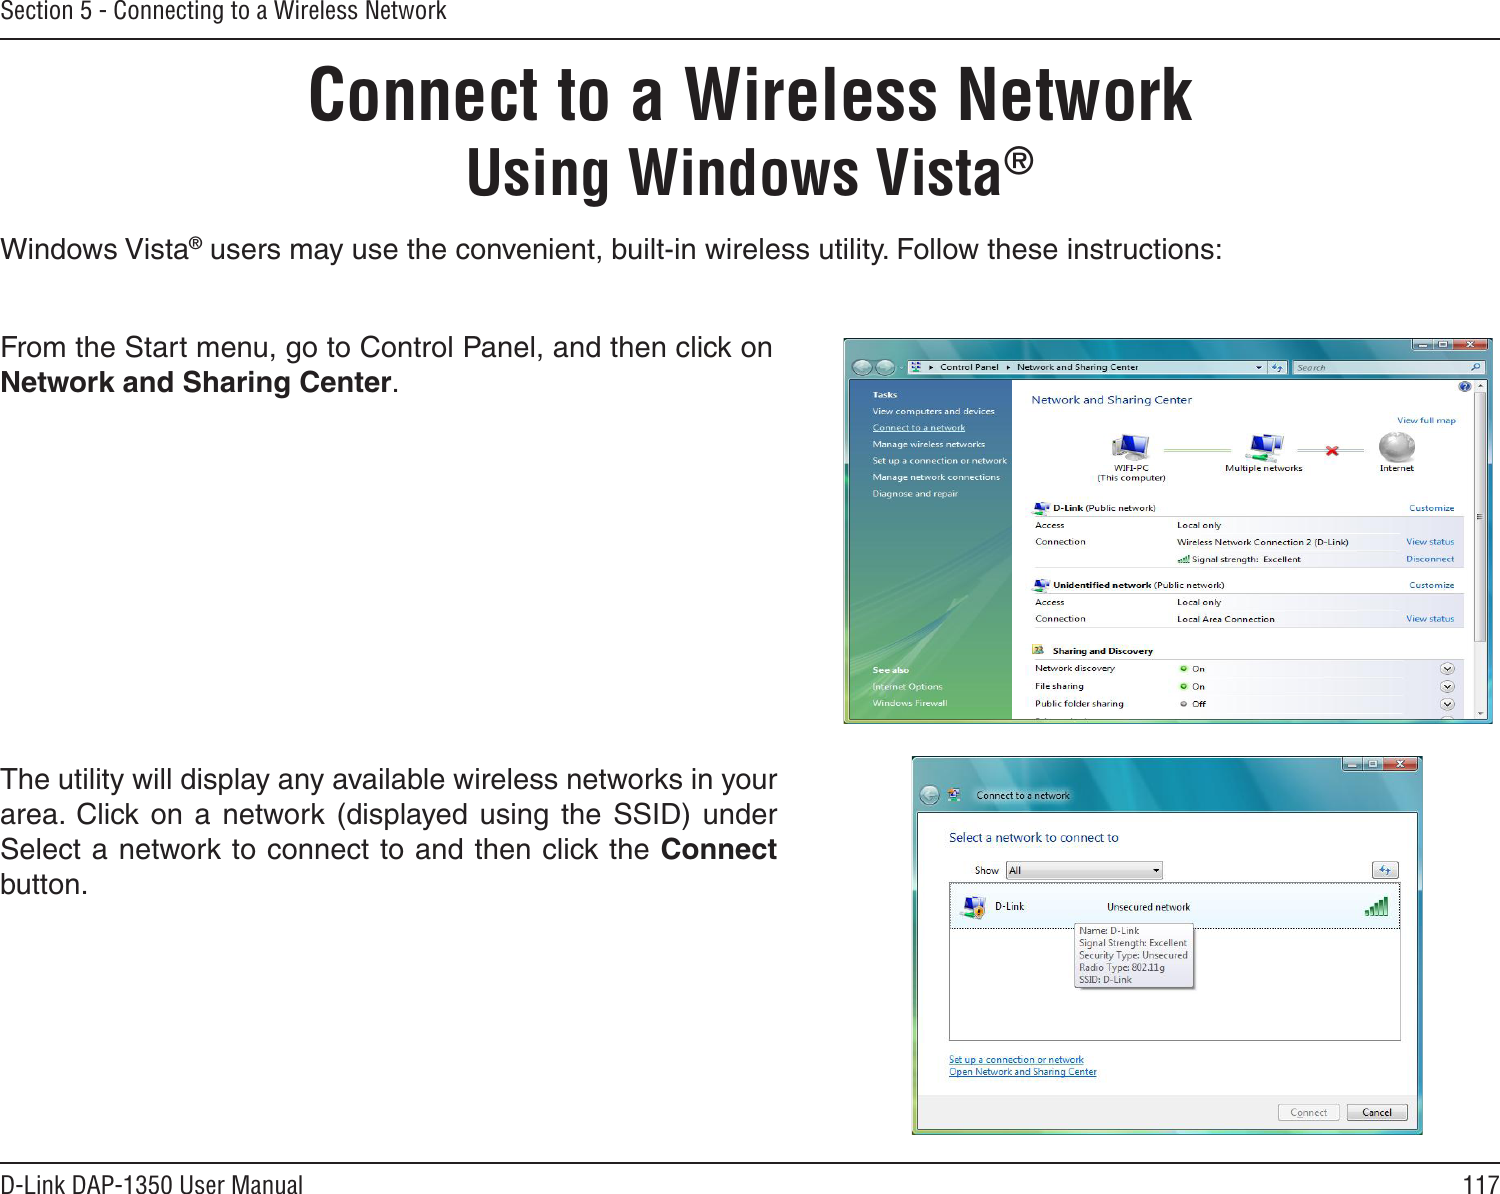 117D-Link DAP-1350 User ManualSection 5 - Connecting to a Wireless NetworkConnect to a Wireless NetworkUsing Windows Vista® Windows Vista® users may use the convenient, built-in wireless utility. Follow these instructions: From the Start menu, go to Control Panel, and then click on Network and Sharing Center. The utility will display any available wireless networks in your area.  Click  on  a network  (displayed using  the SSID)  under Select a network to connect to and then click the Connect button.